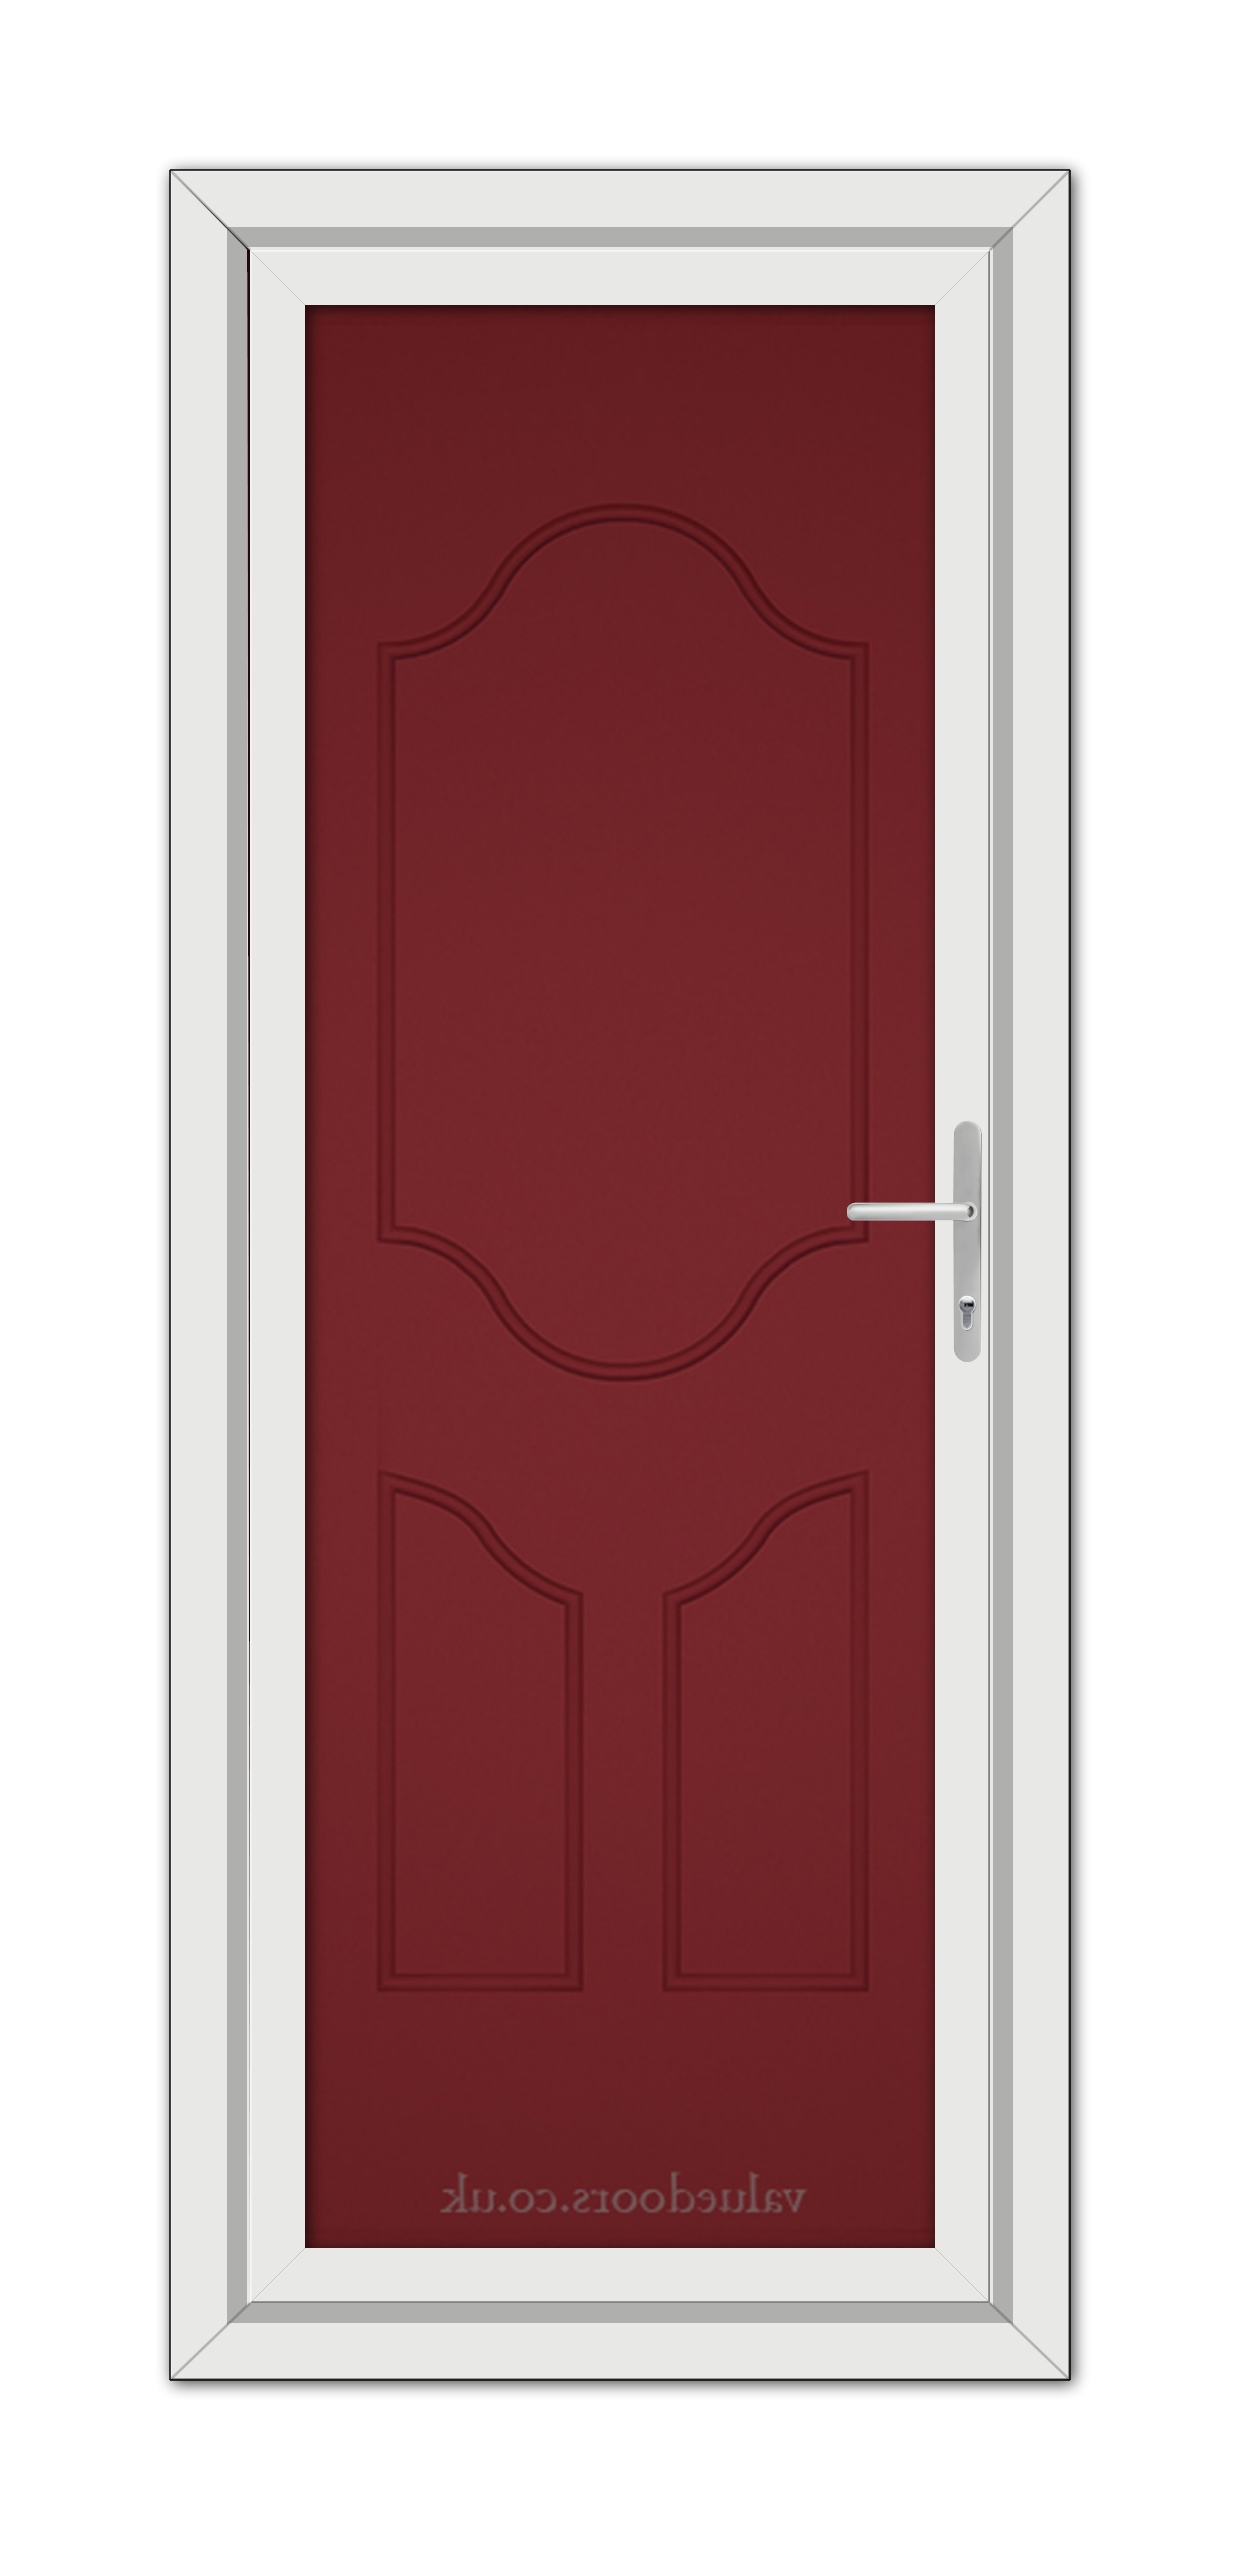 A modern Red Althorpe Solid uPVC Door with a white frame and a silver handle, set in a vertical position.